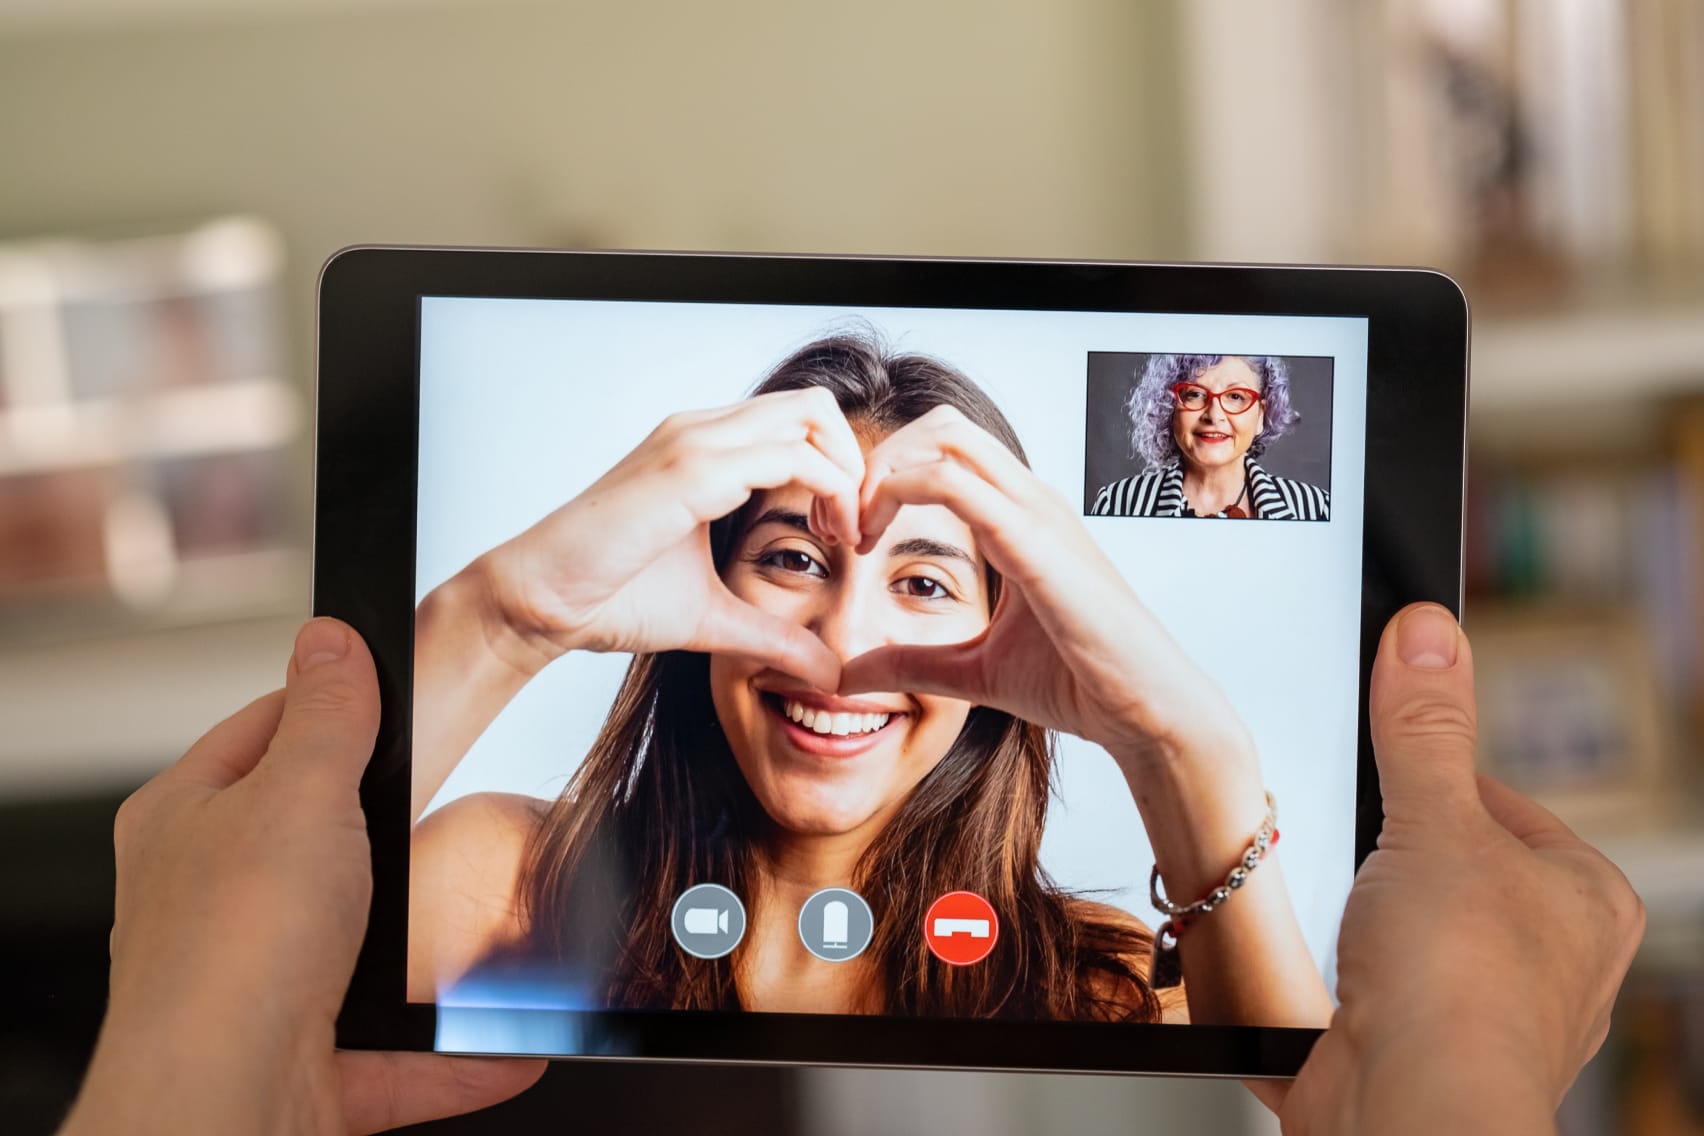 Video call by tablet